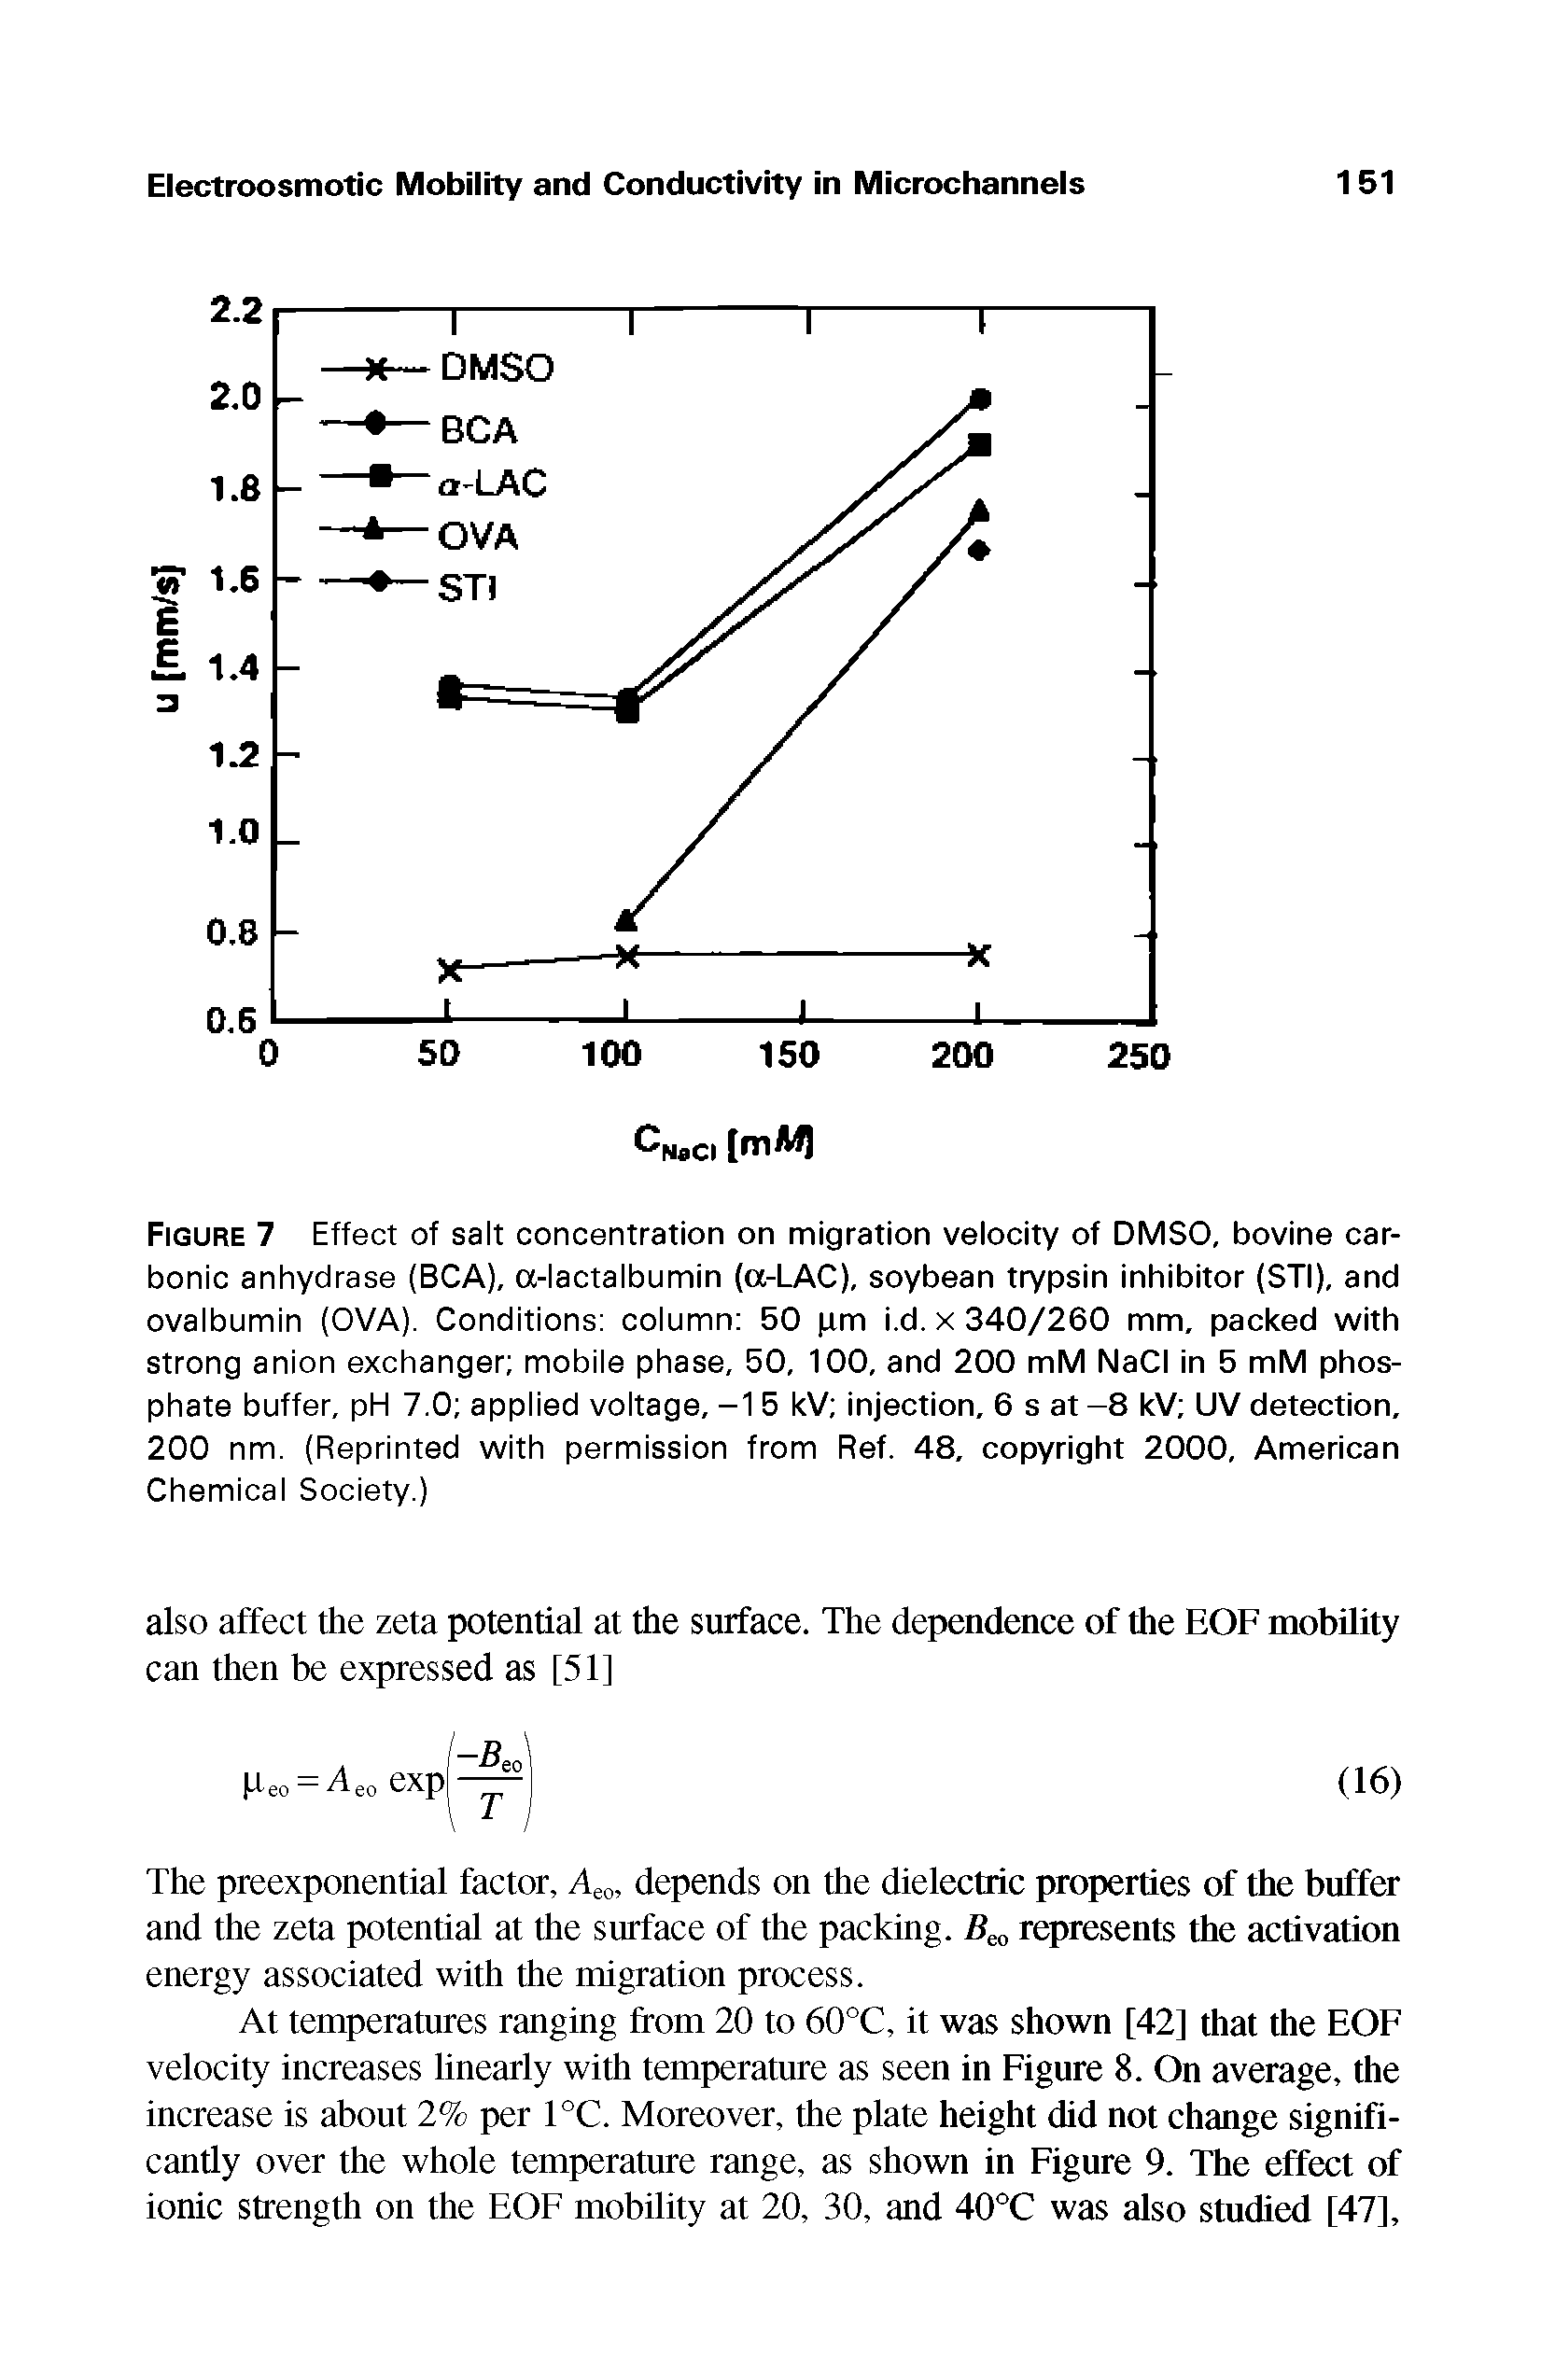 Figure 7 Effect of salt concentration on migration velocity of DMSO, bovine carbonic anhydrase (BCA), a-lactalbumin (a-LAC), soybean trypsin inhibitor (STI), and ovalbumin (OVA). Conditions column 50 pm i.d. x 340/260 mm, packed with strong anion exchanger mobile phase, 50, 100, and 200 mM NaCI in 5 mM phosphate buffer, pH 7.0 applied voltage, -1 5 kV injection, 6 s at-8 kV UV detection, 200 nm. (Reprinted with permission from Ref. 48, copyright 2000, American Chemical Society.)...